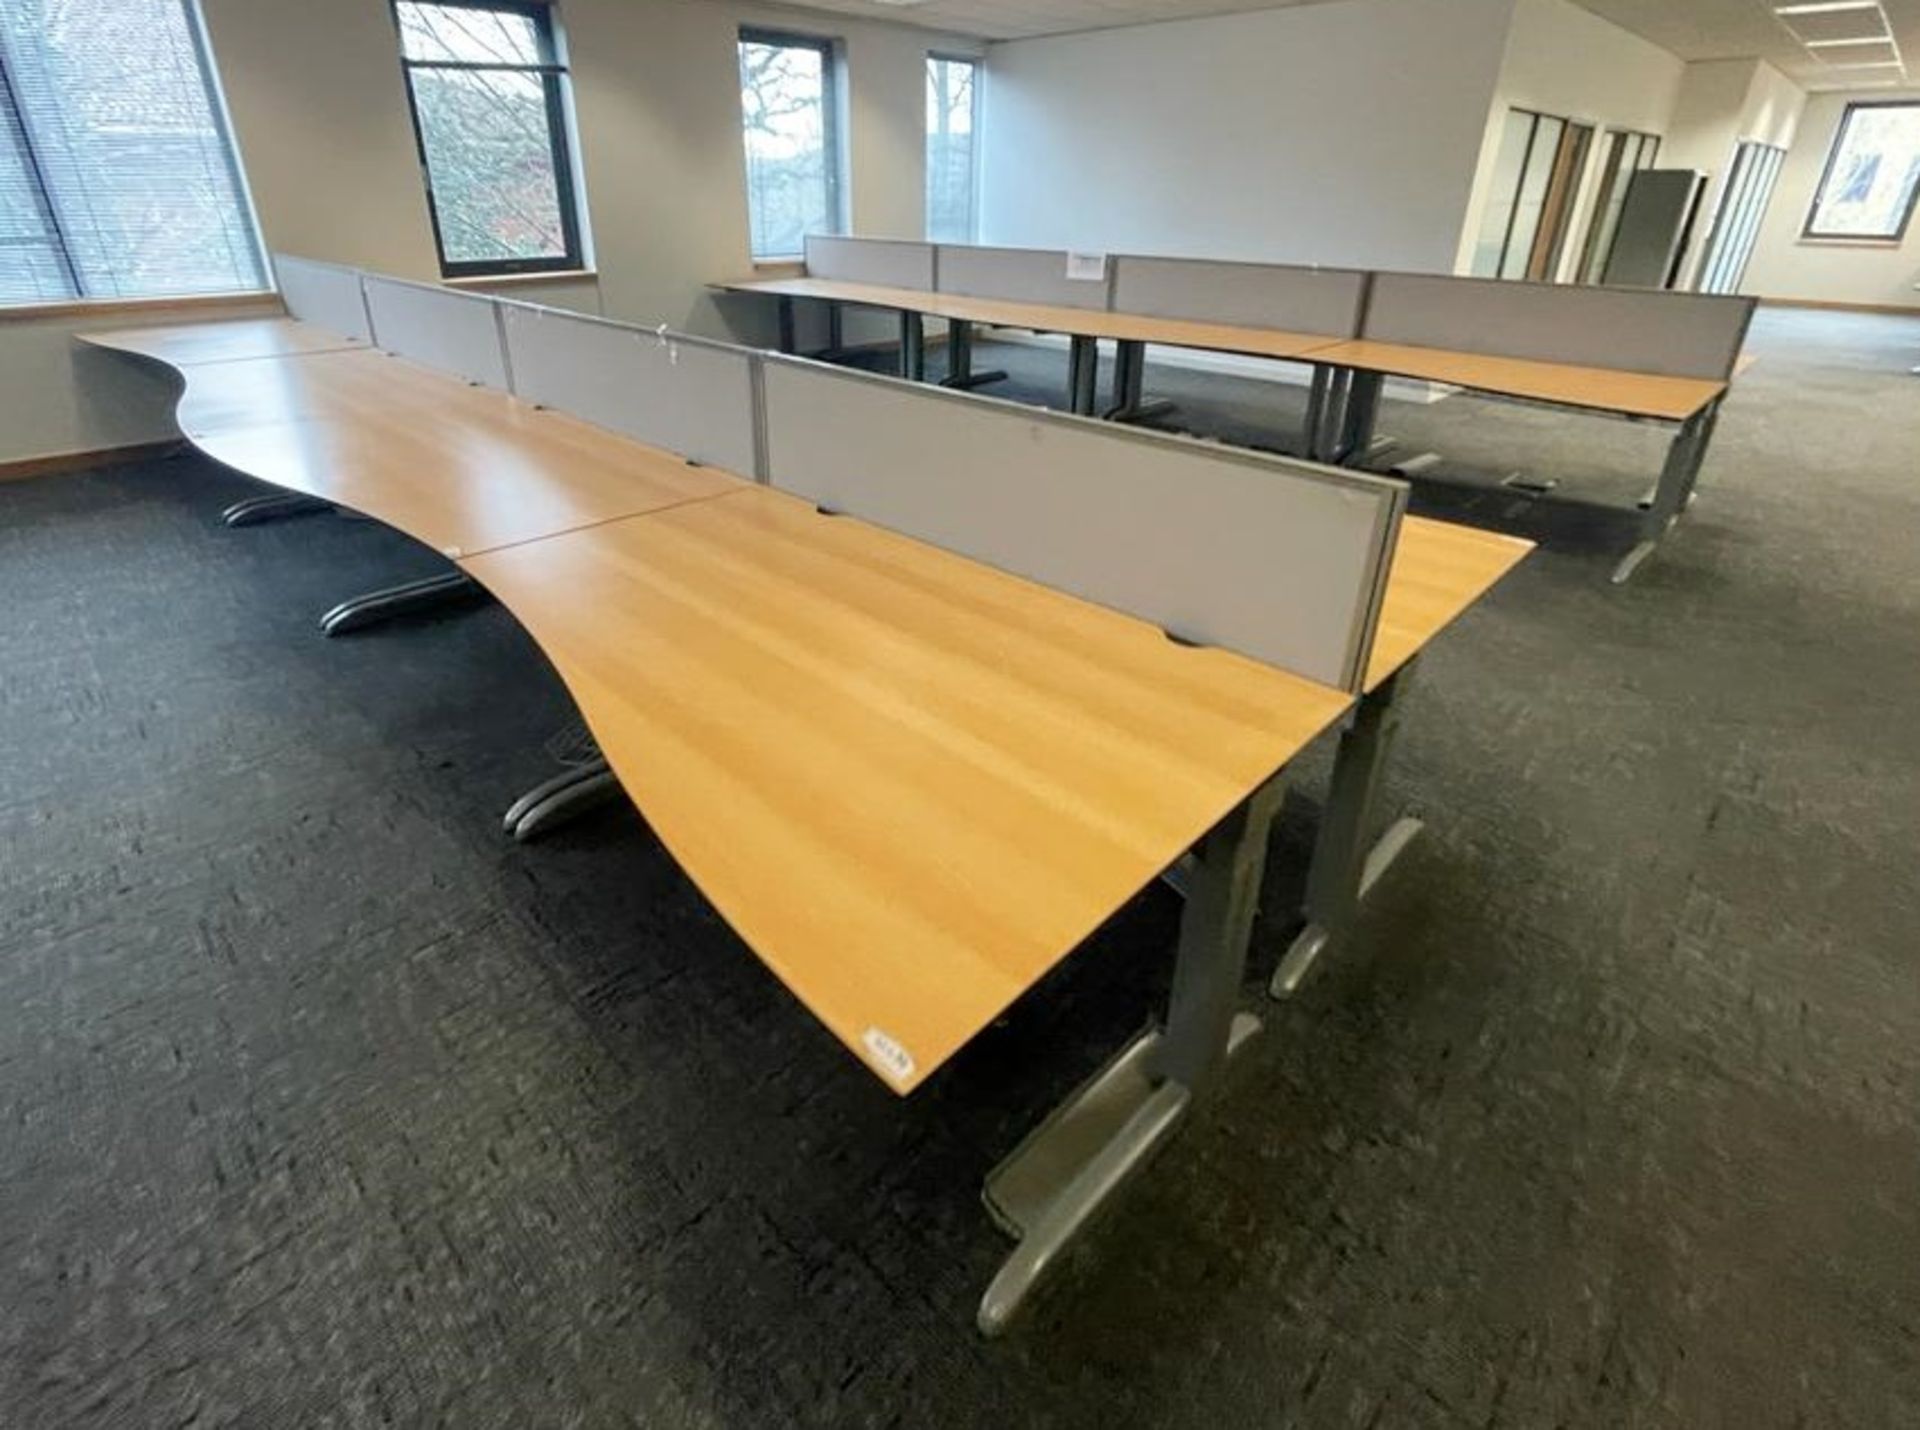 8 x Techo Wave Office Desks With Privacy Panels and Cable Tidy Cages - Beech Wood Finish - Image 13 of 20